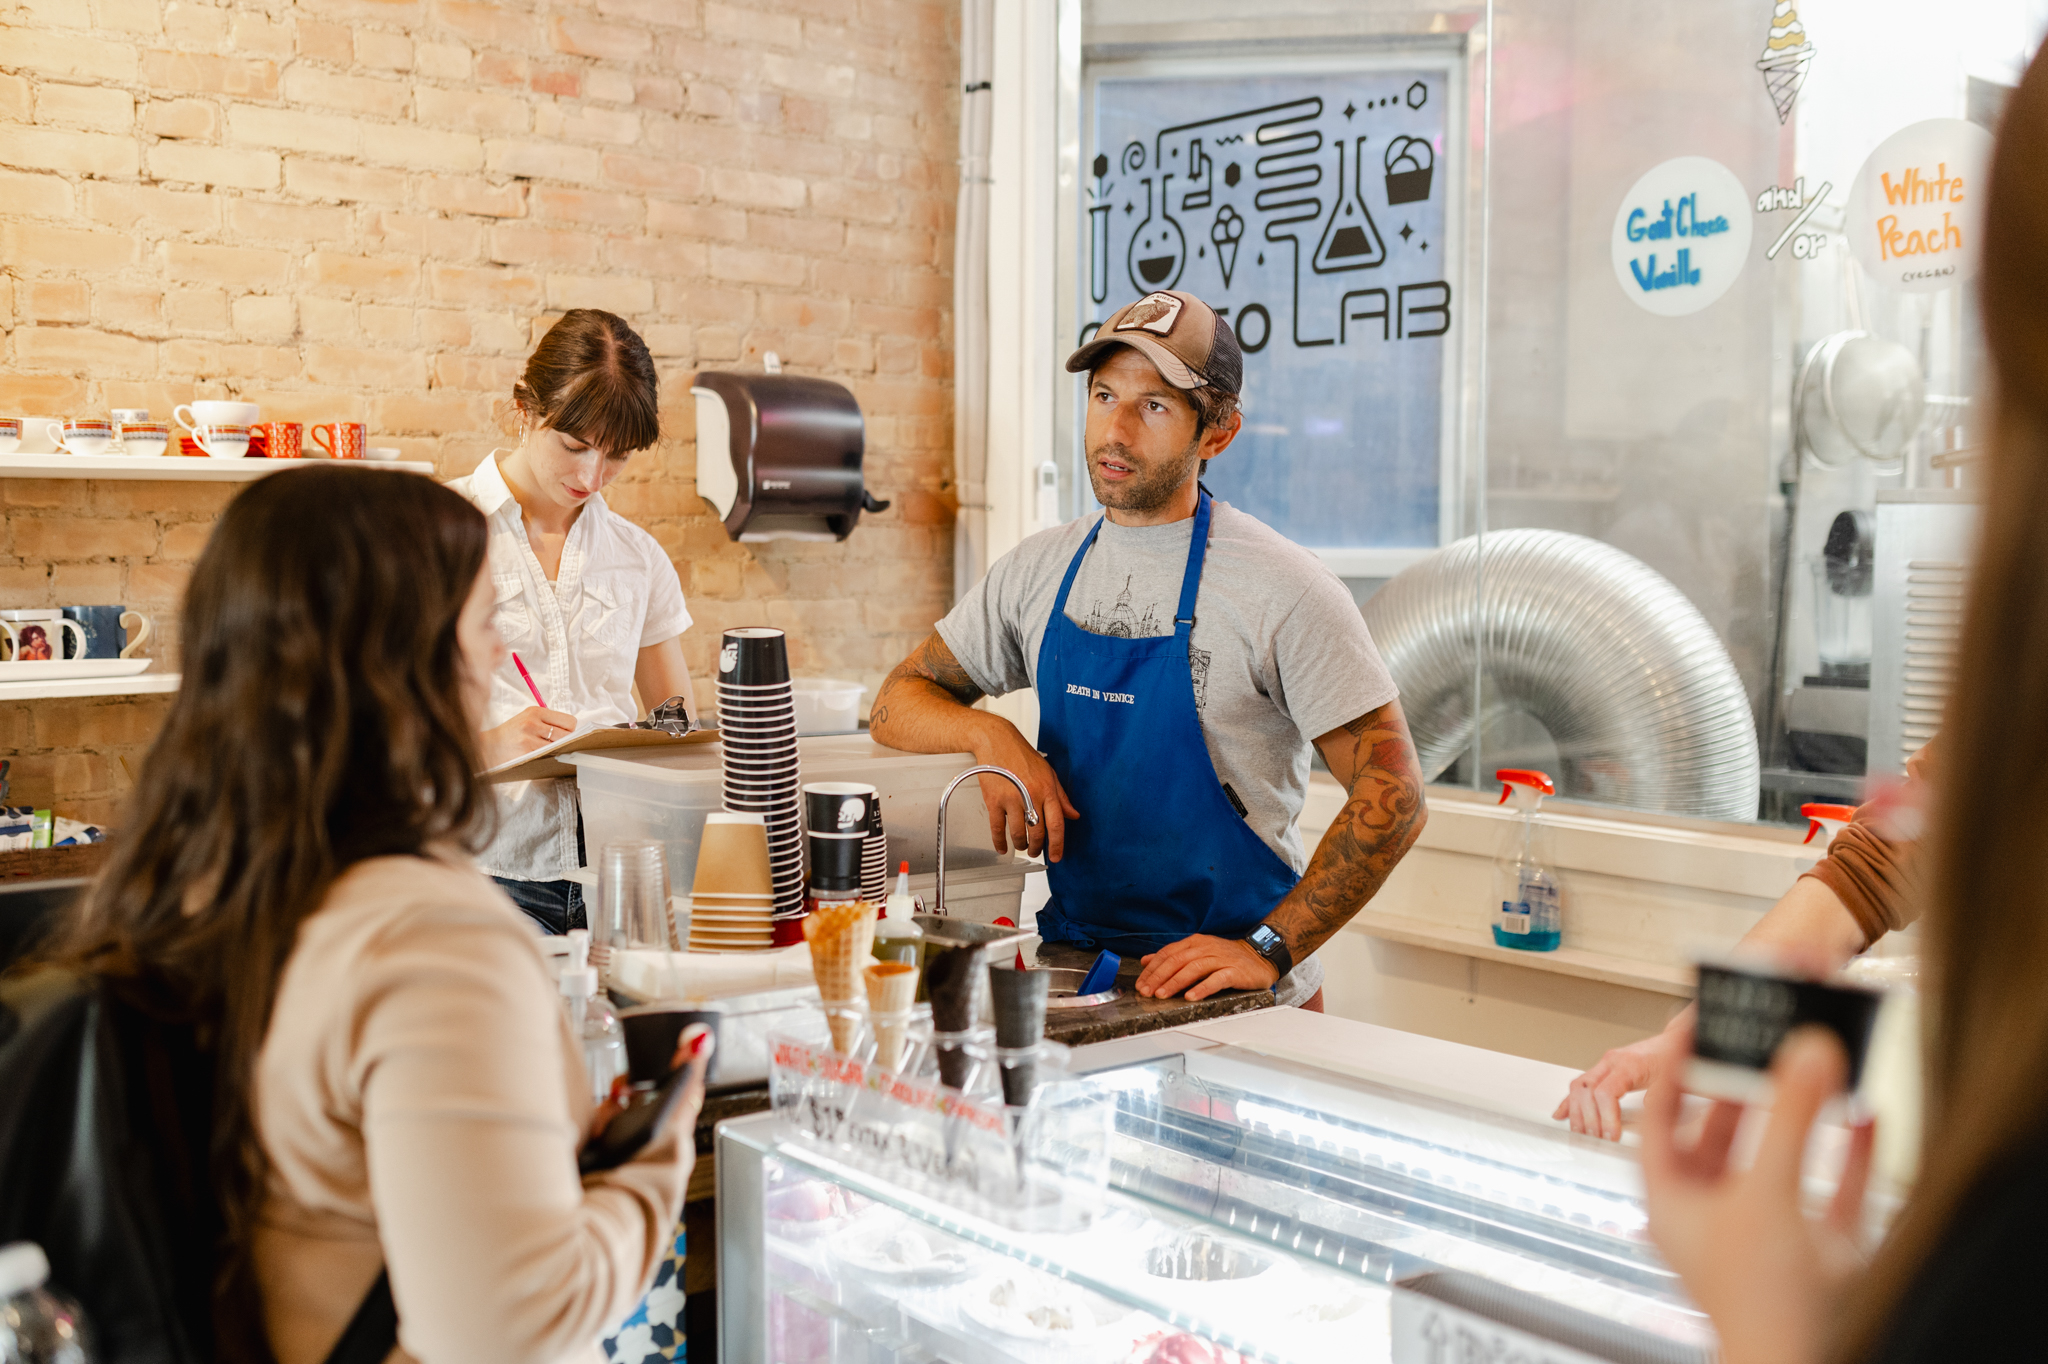 Event photography: A group of people standing in front of a counter, captured professionally.